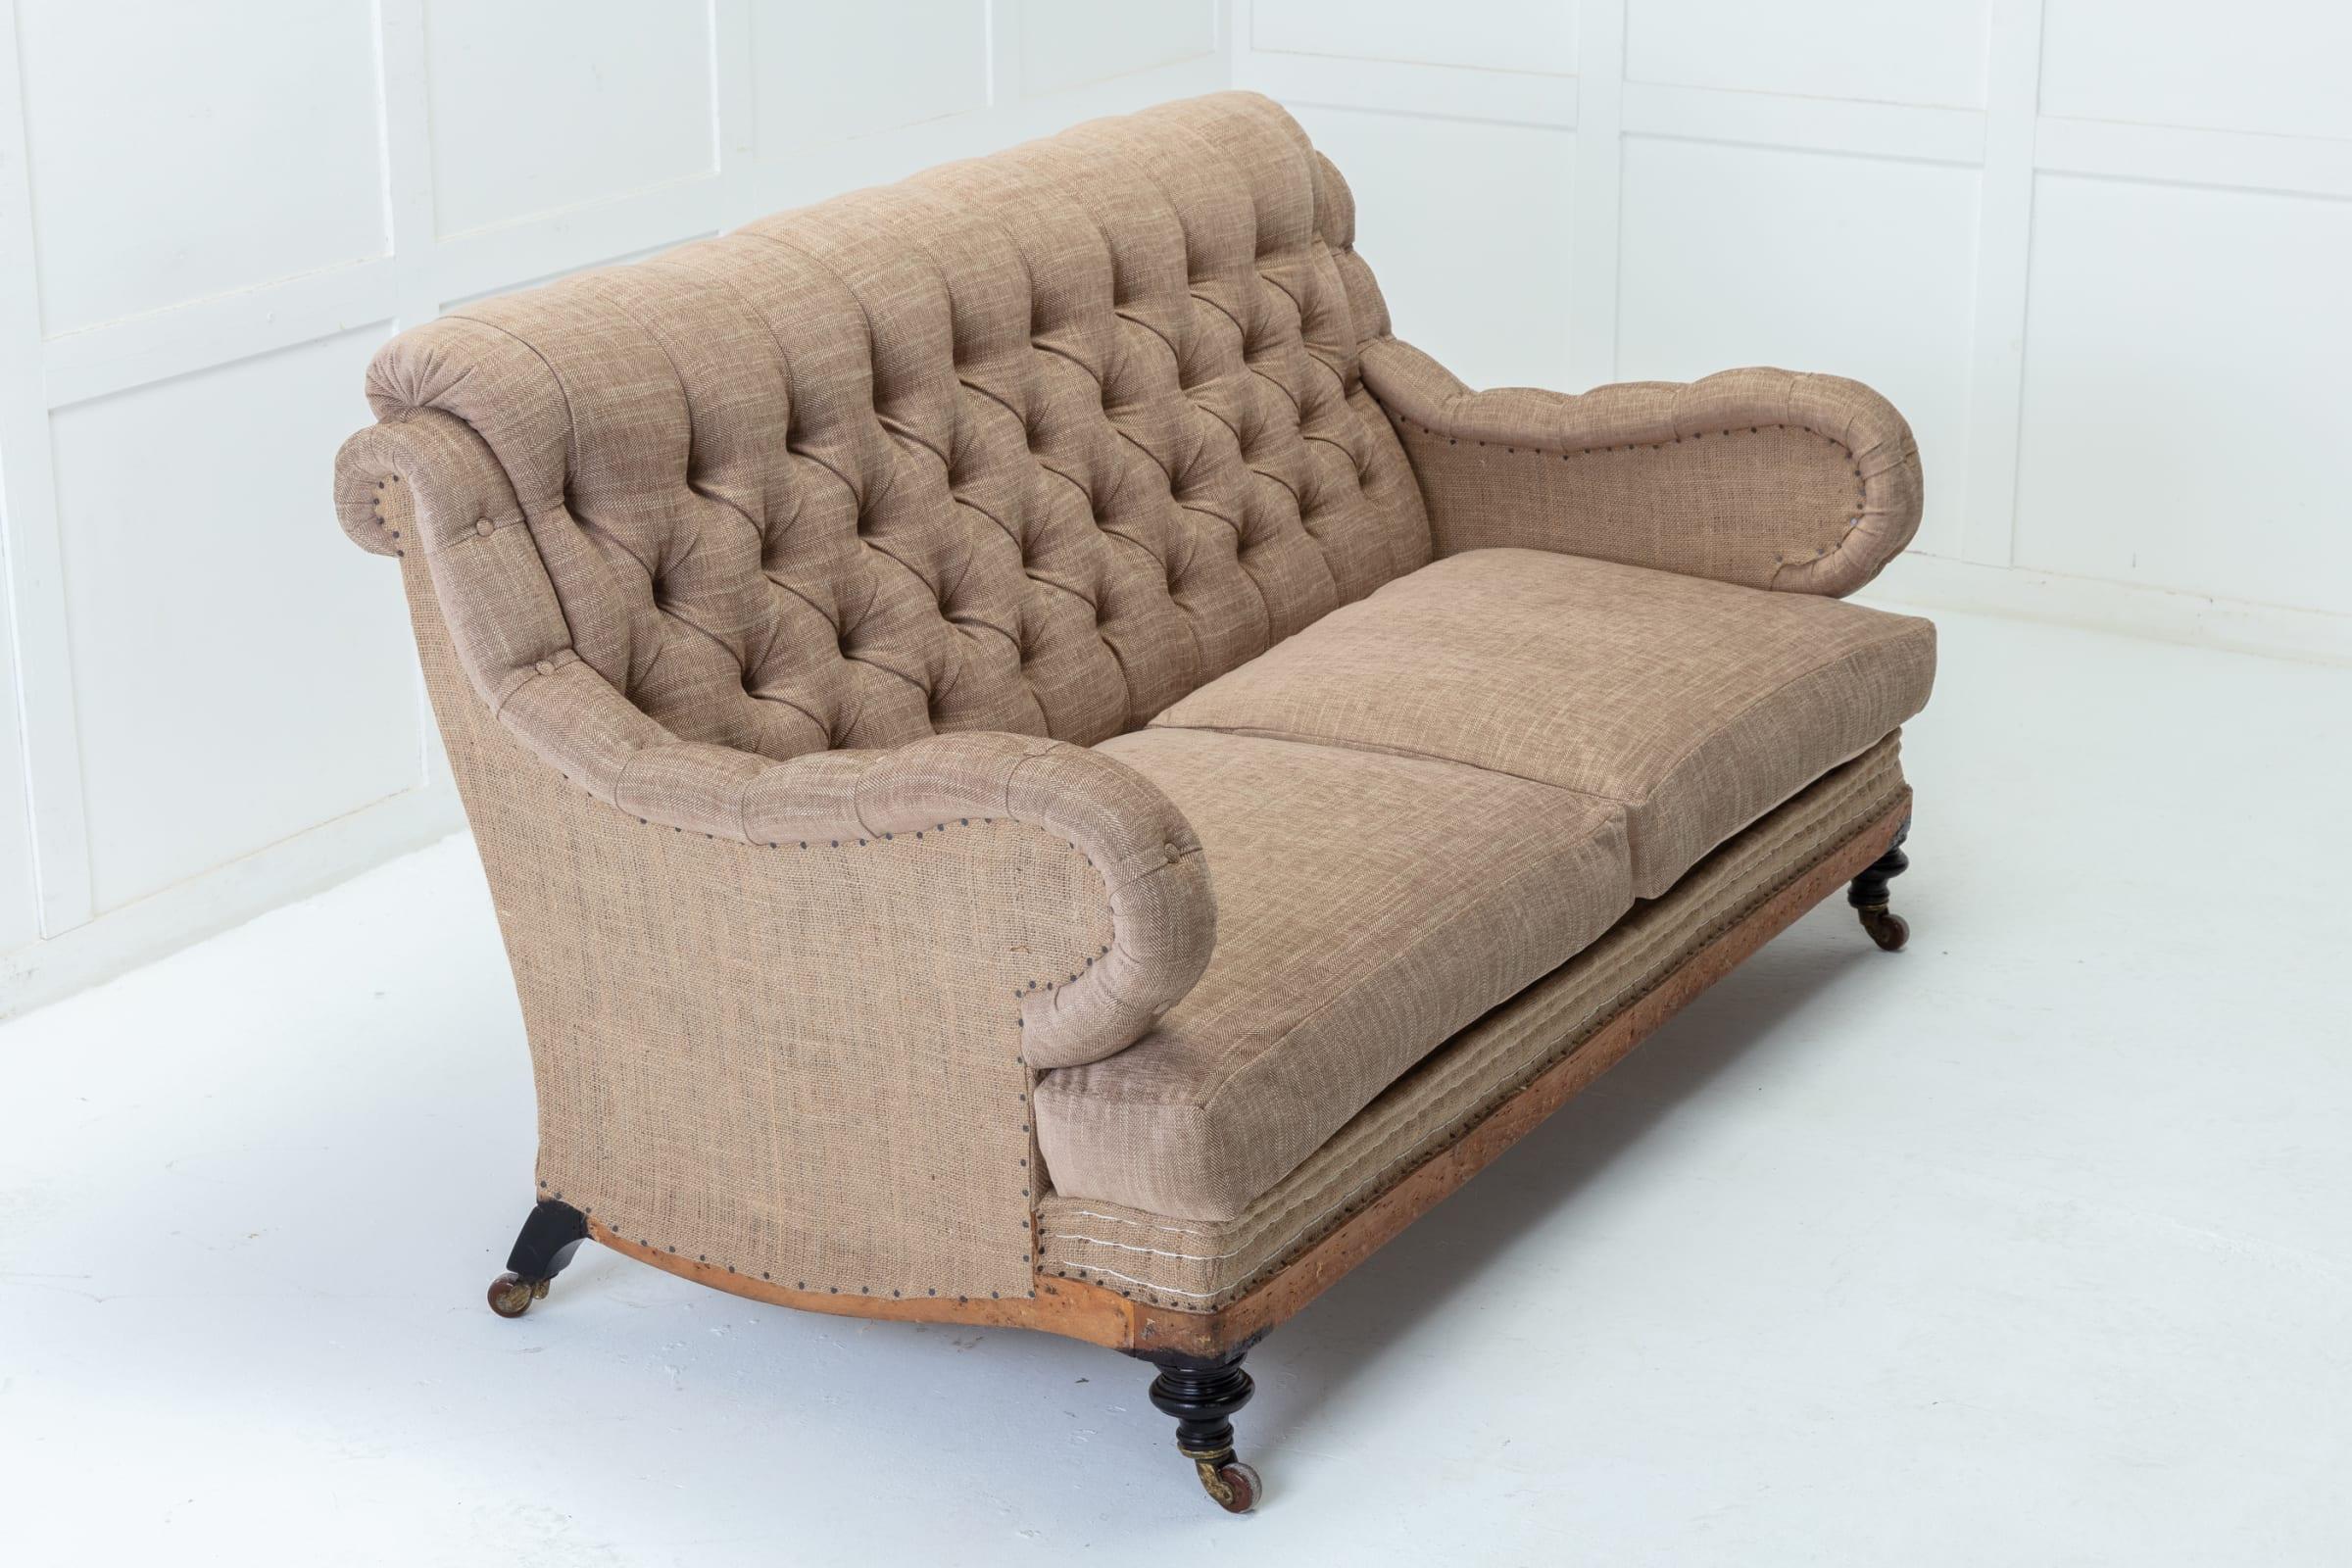 A tailored two seater button-back couch with rolled arms and deep seat, in the fashion of Howard and Sons, on turned legs with brass castors. Fully stripped back and freshly reupholstered in a deconstructed manner in hand-stitched putty colored jute